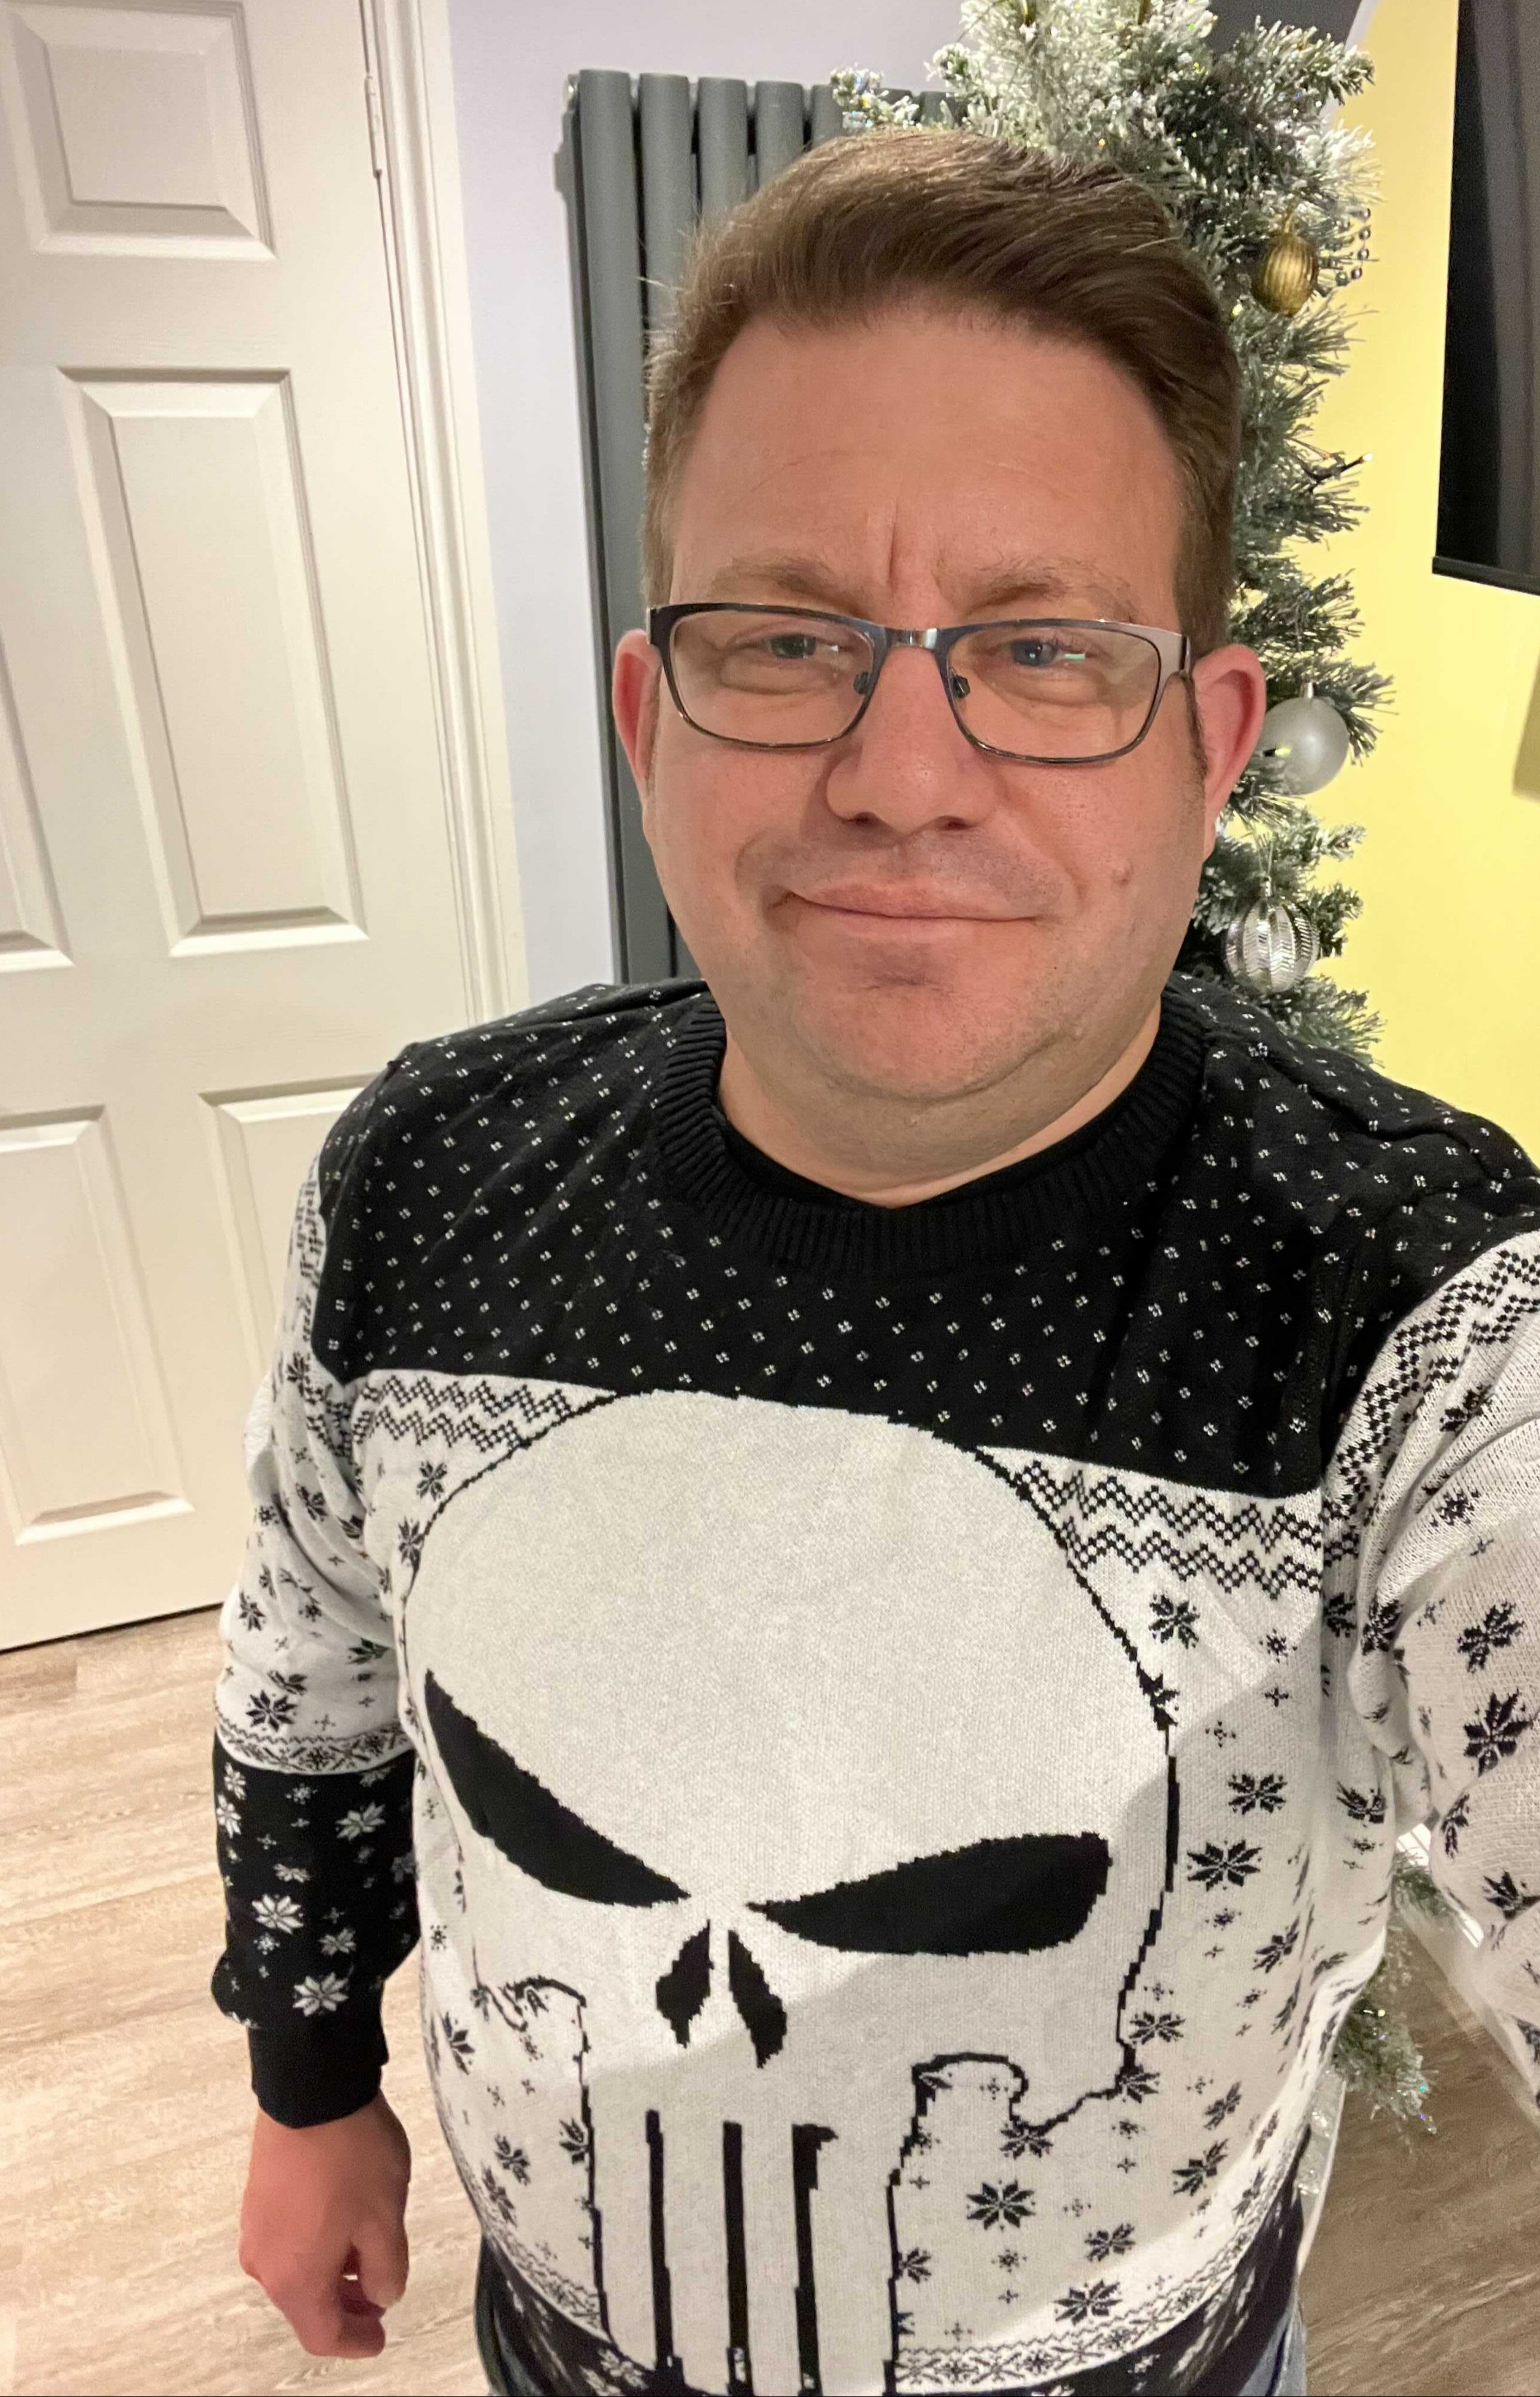 Graham Smith wearing his favourite Christmas jumper